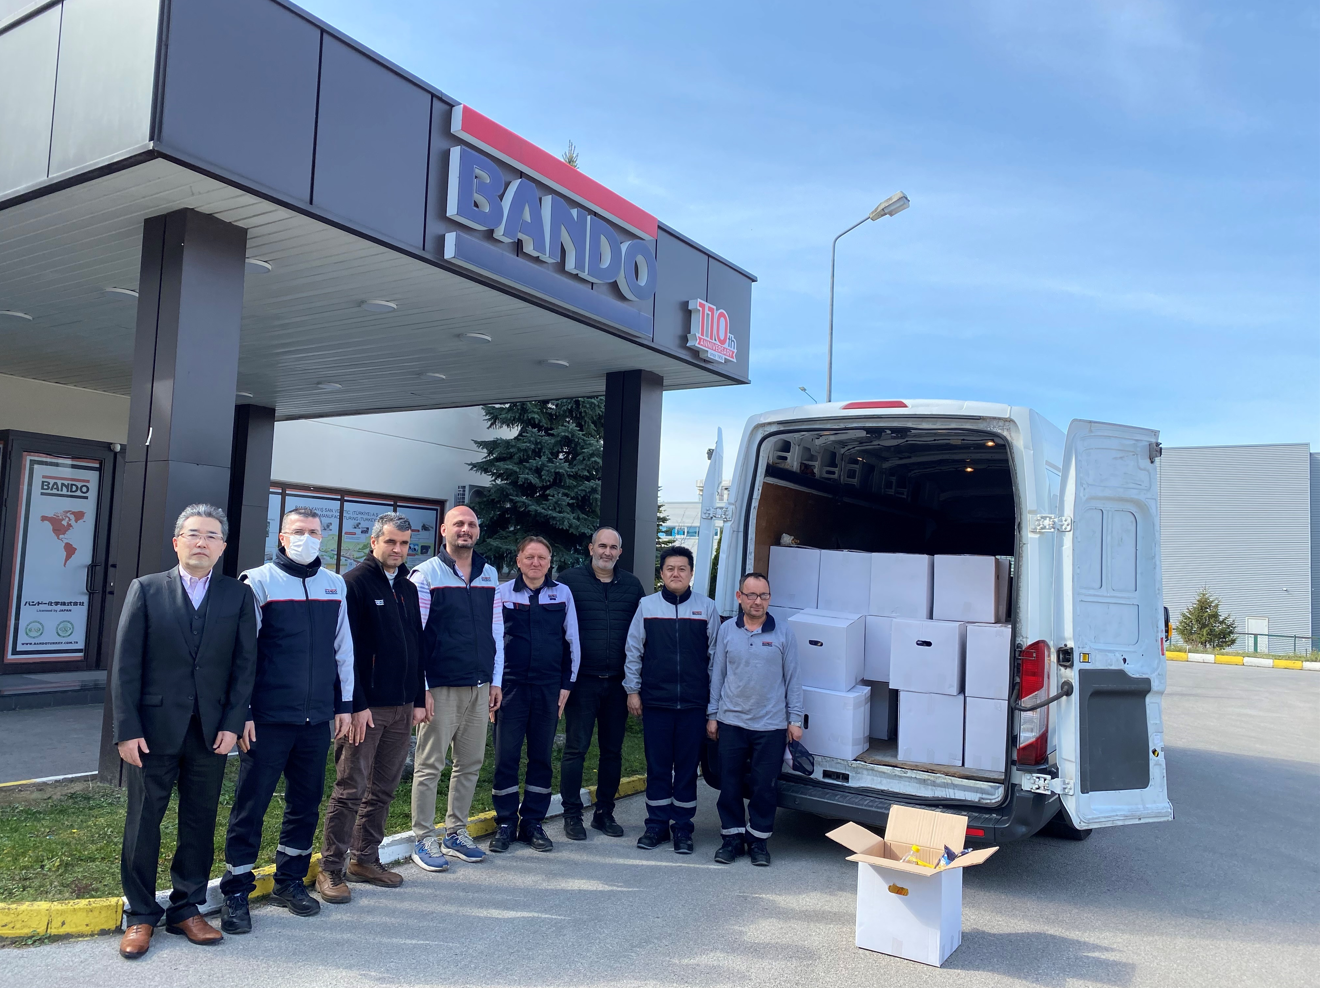 Provided relief supplies such as food to the disaster-stricken areas through Kocaeli Prefecture